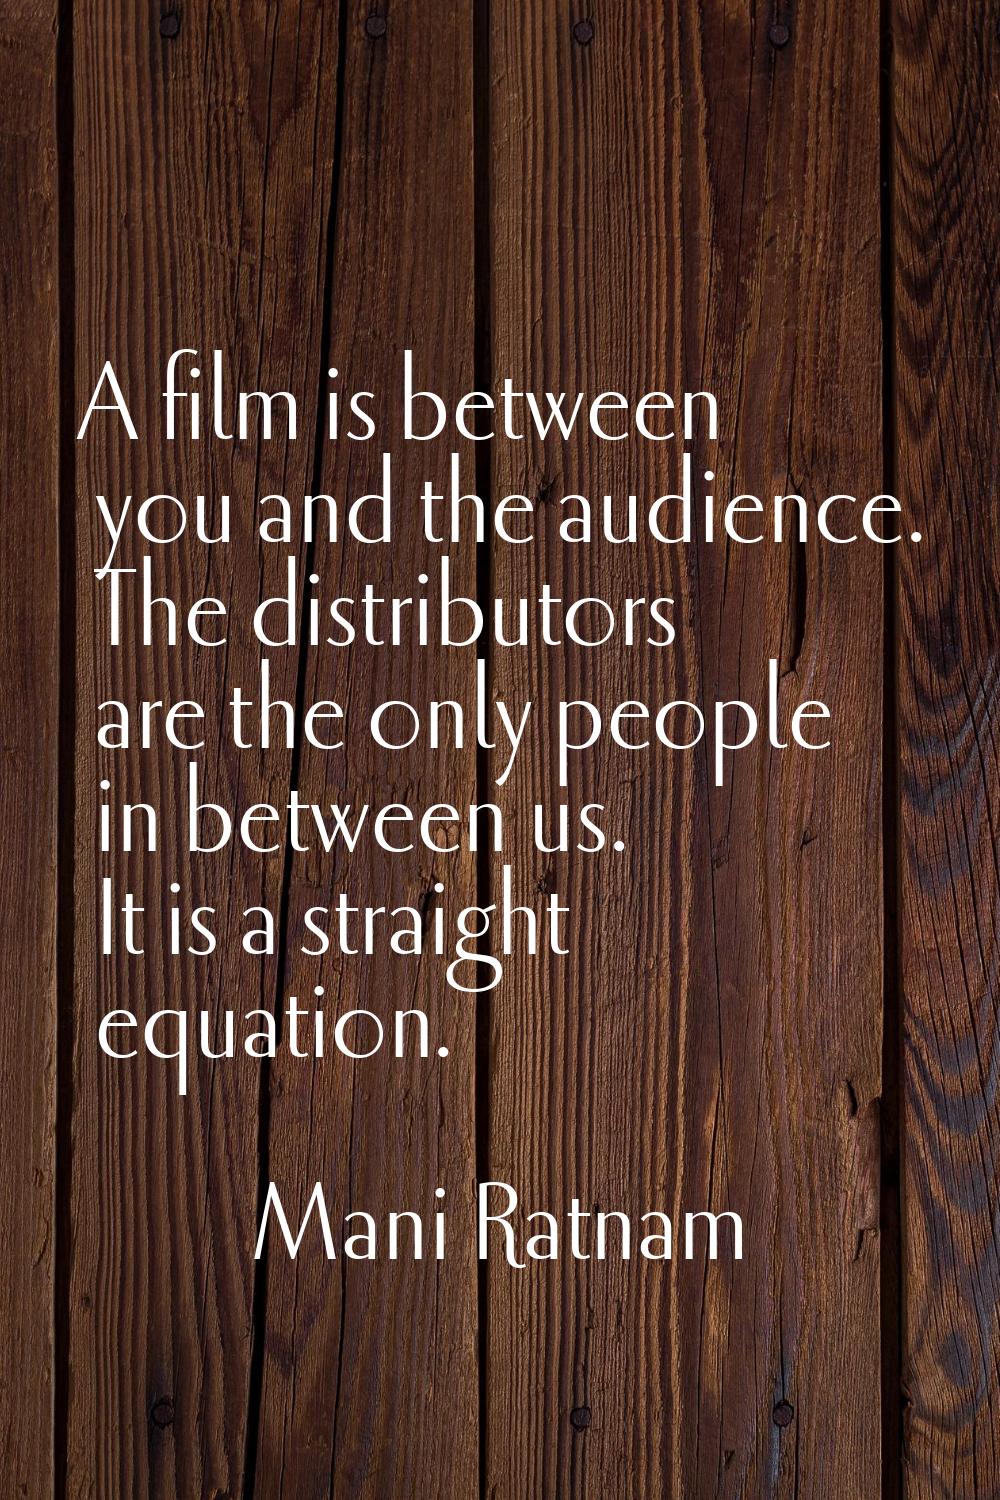 A film is between you and the audience. The distributors are the only people in between us. It is a